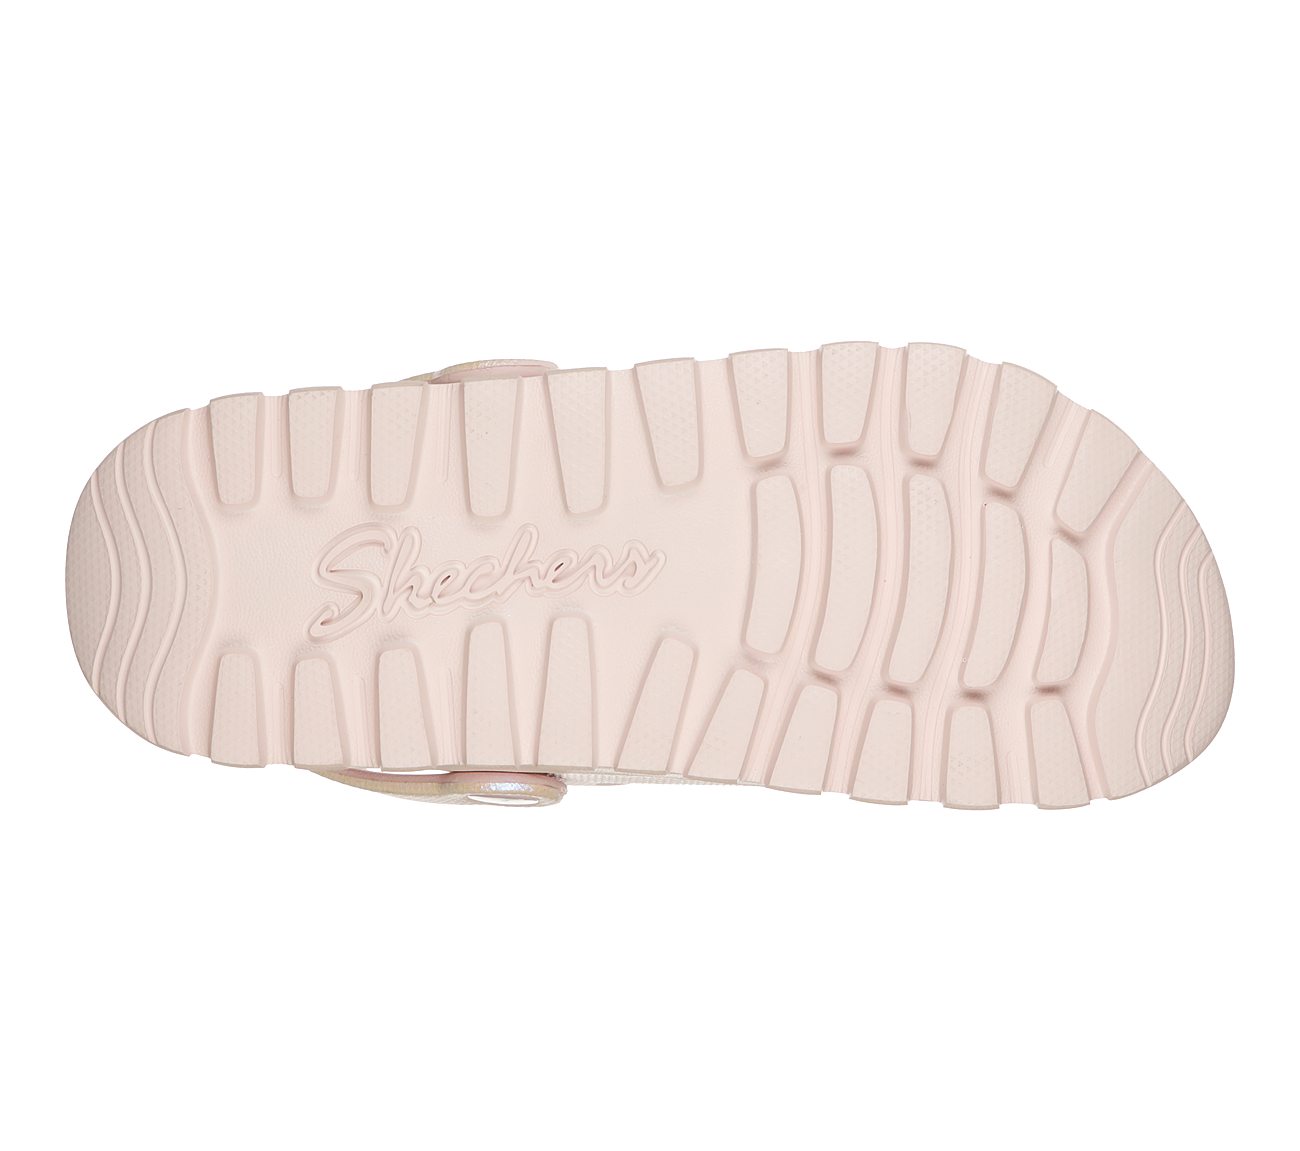 ARCH FIT FOOTSTEPS-PIXIE DUST, LLLIGHT PINK Footwear Bottom View